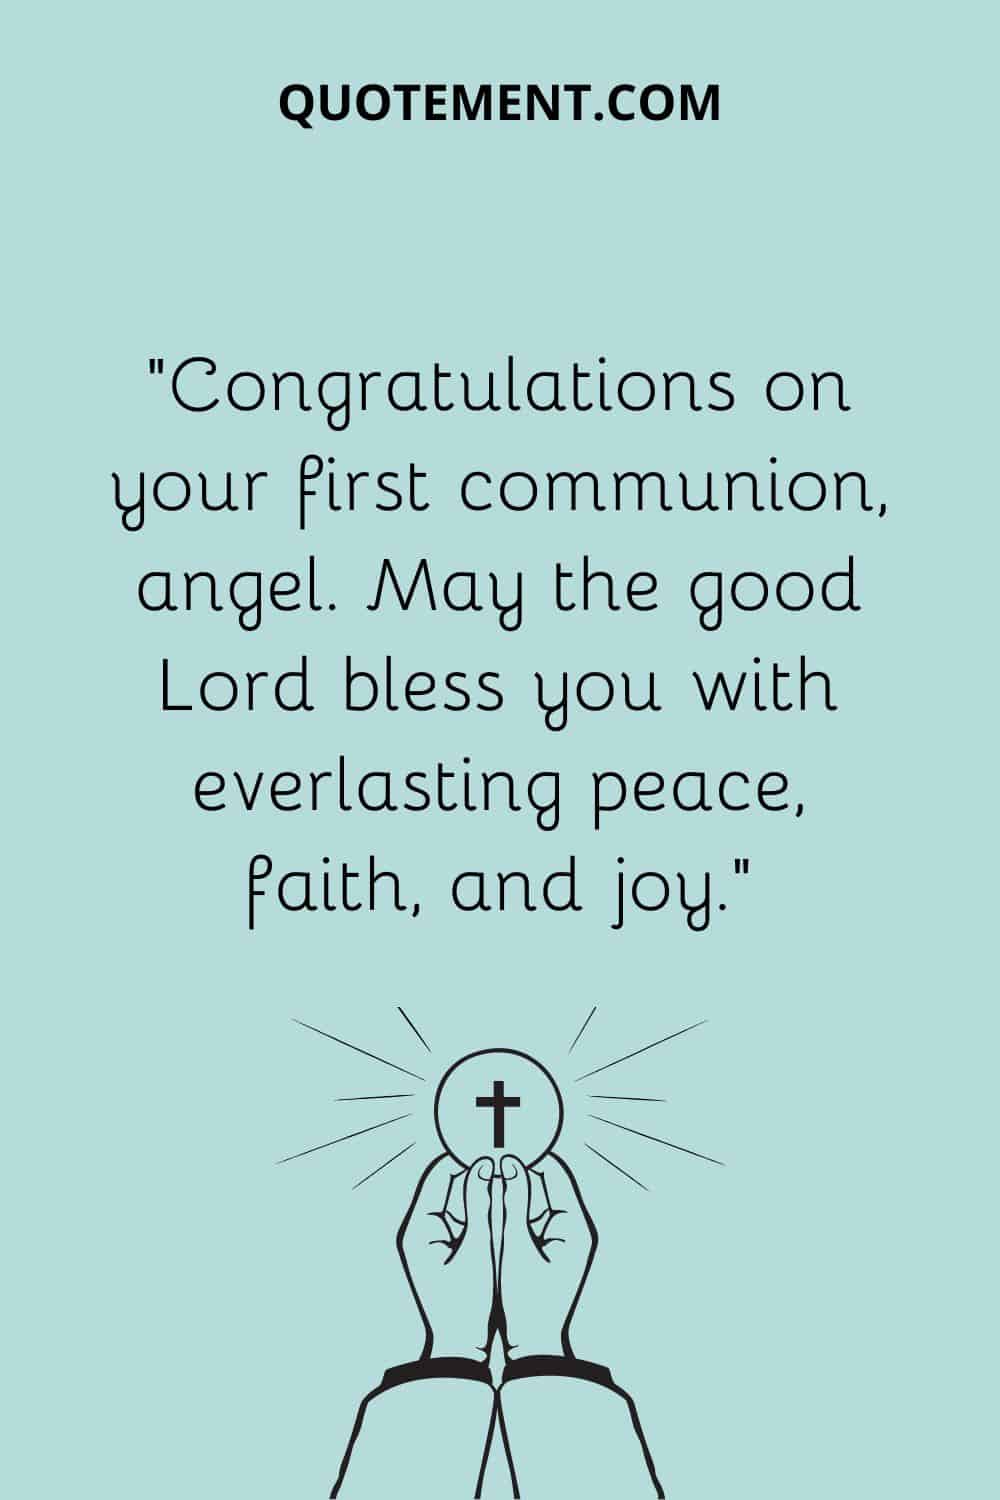 “Congratulations on your first communion, angel. May the good Lord bless you with everlasting peace, faith, and joy.”